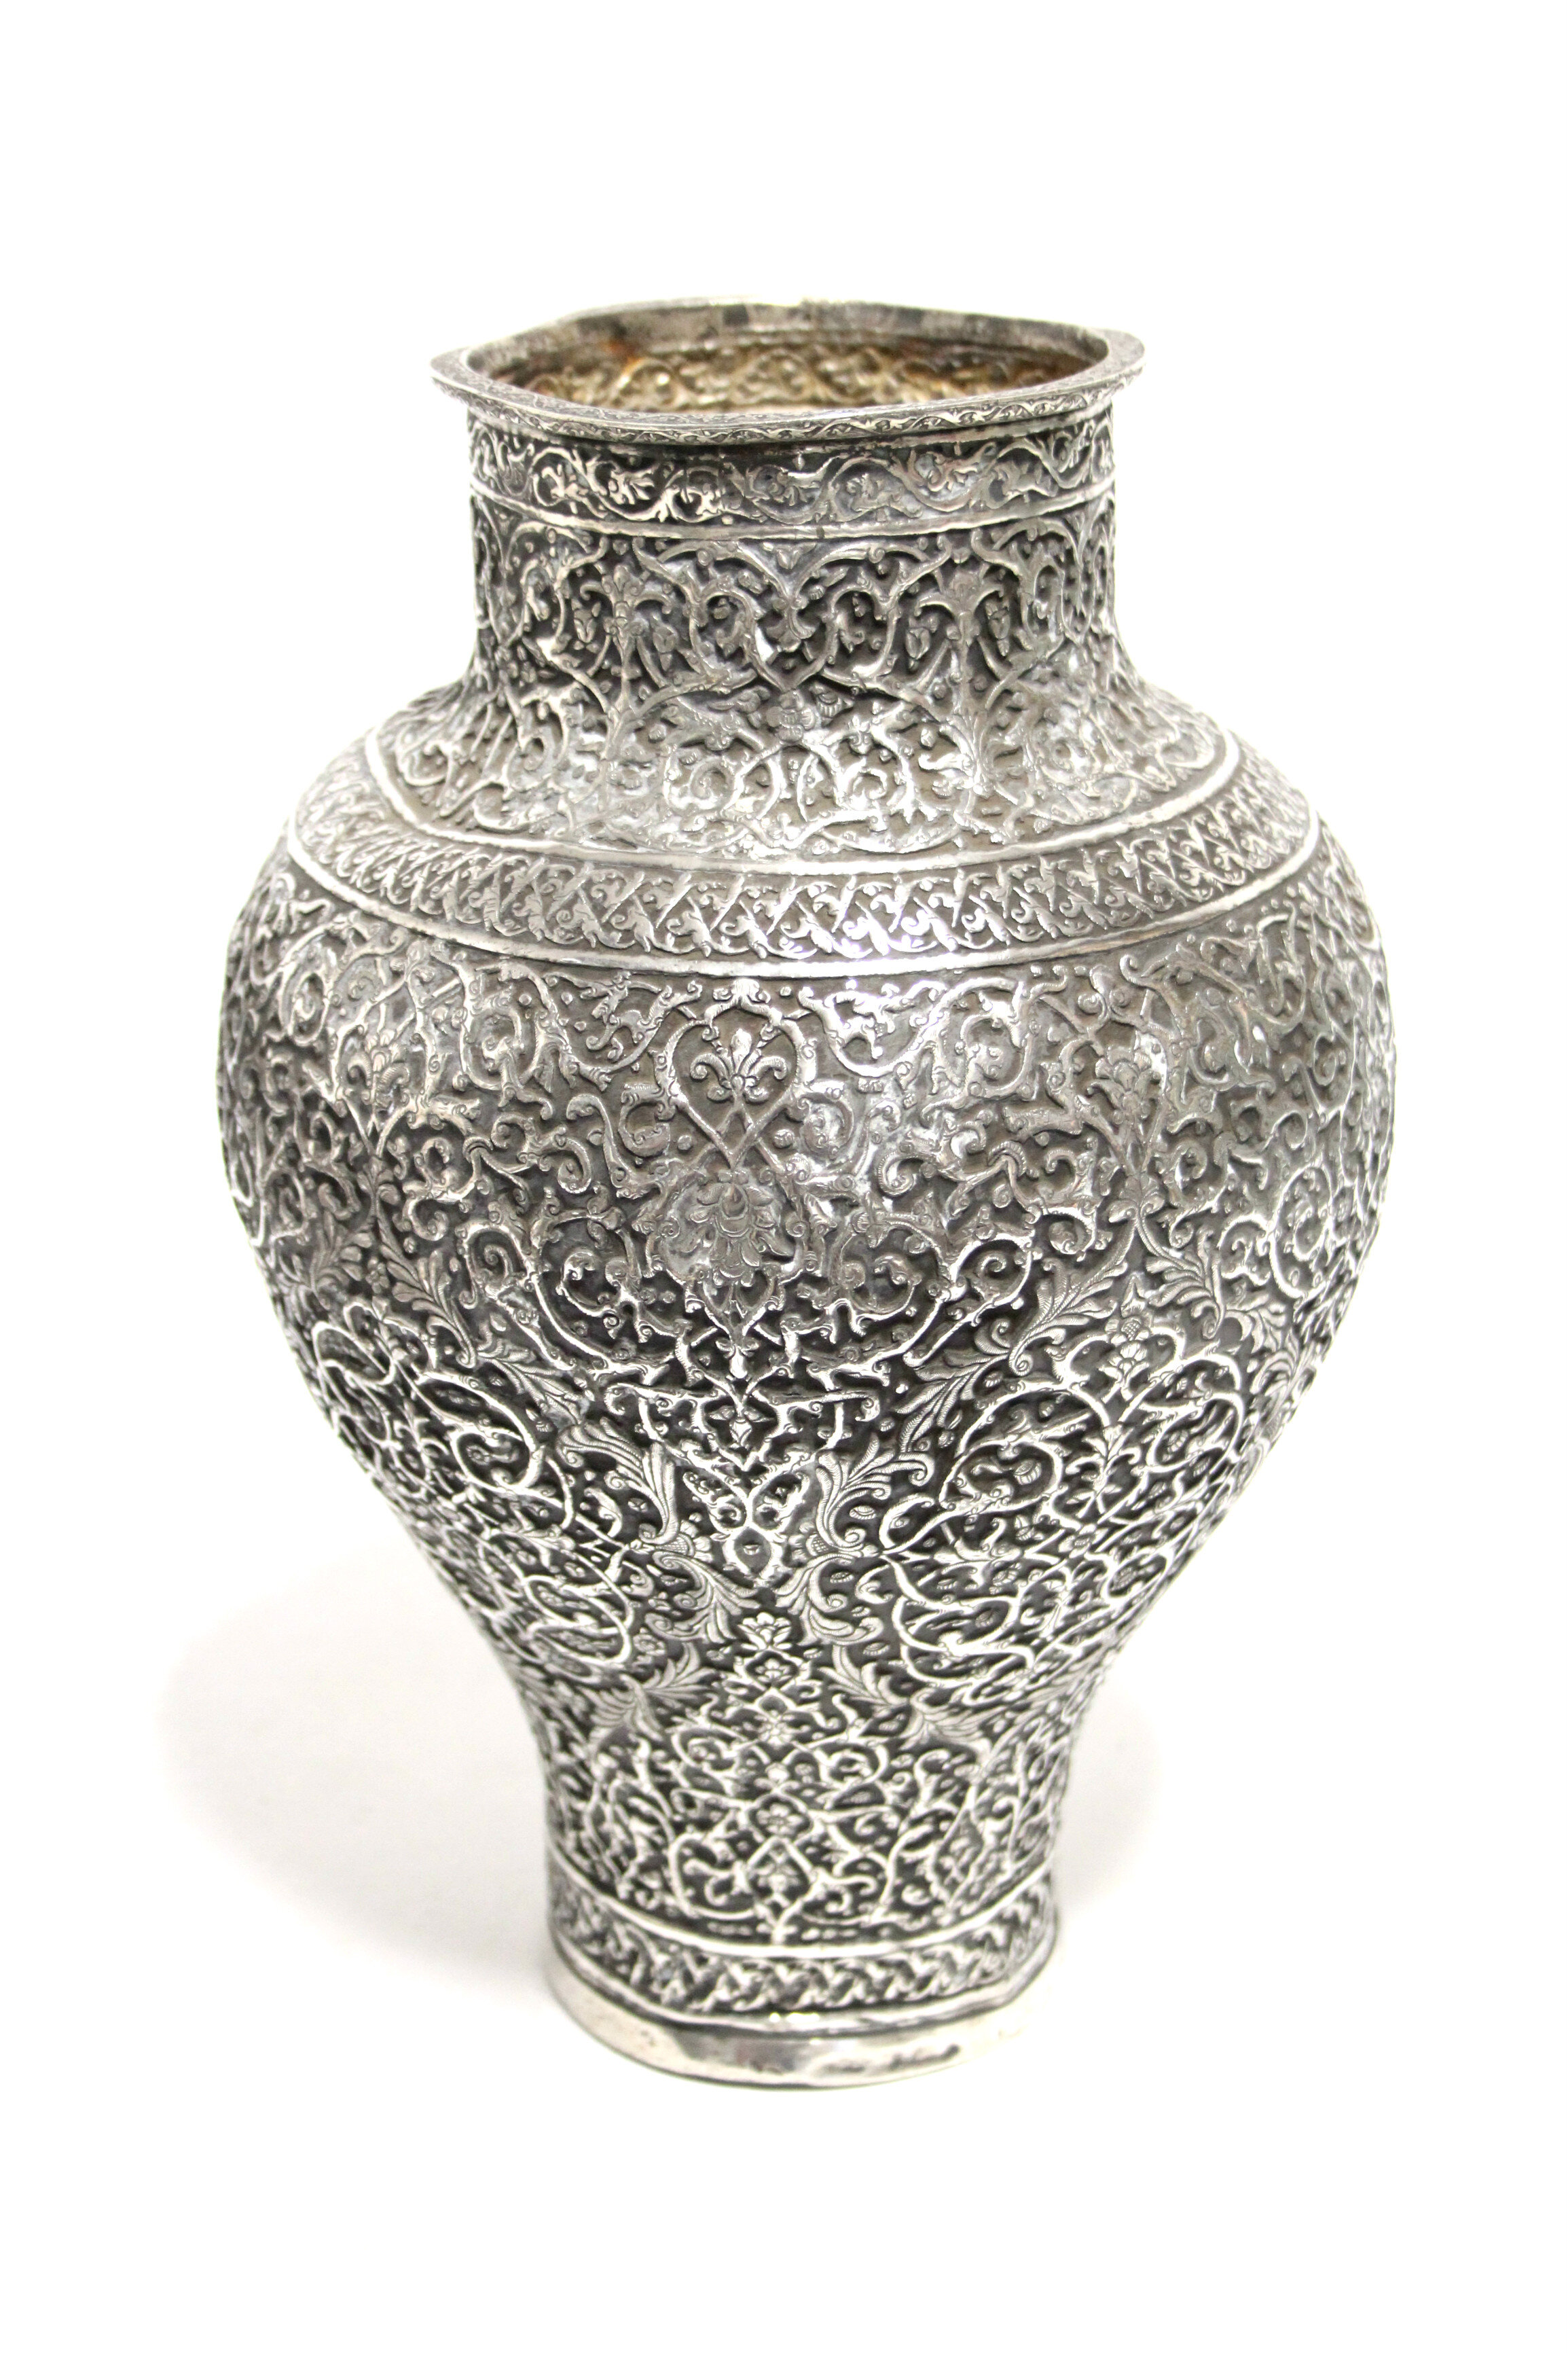 An early Persian silver vase Sold For £23,00 in August 2016.jpg